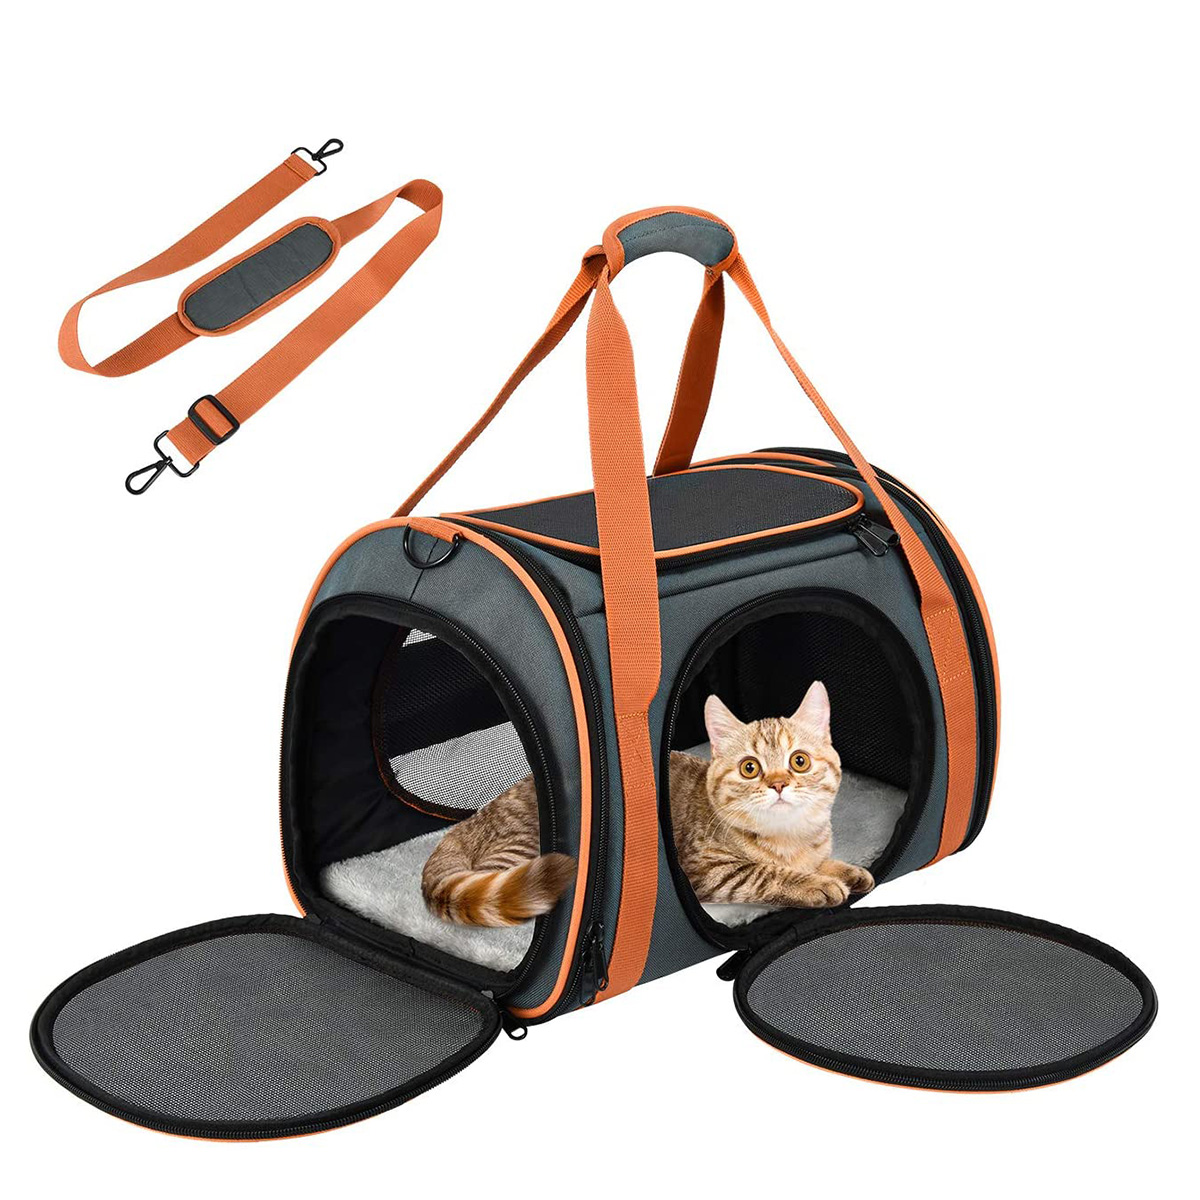 Cat Carrier TSA Airline Approved with Ventilation for Small Medium Cats Dogs Puppies with Big Space 5 Mesh Windows 4 Open Doors-Boyel Living